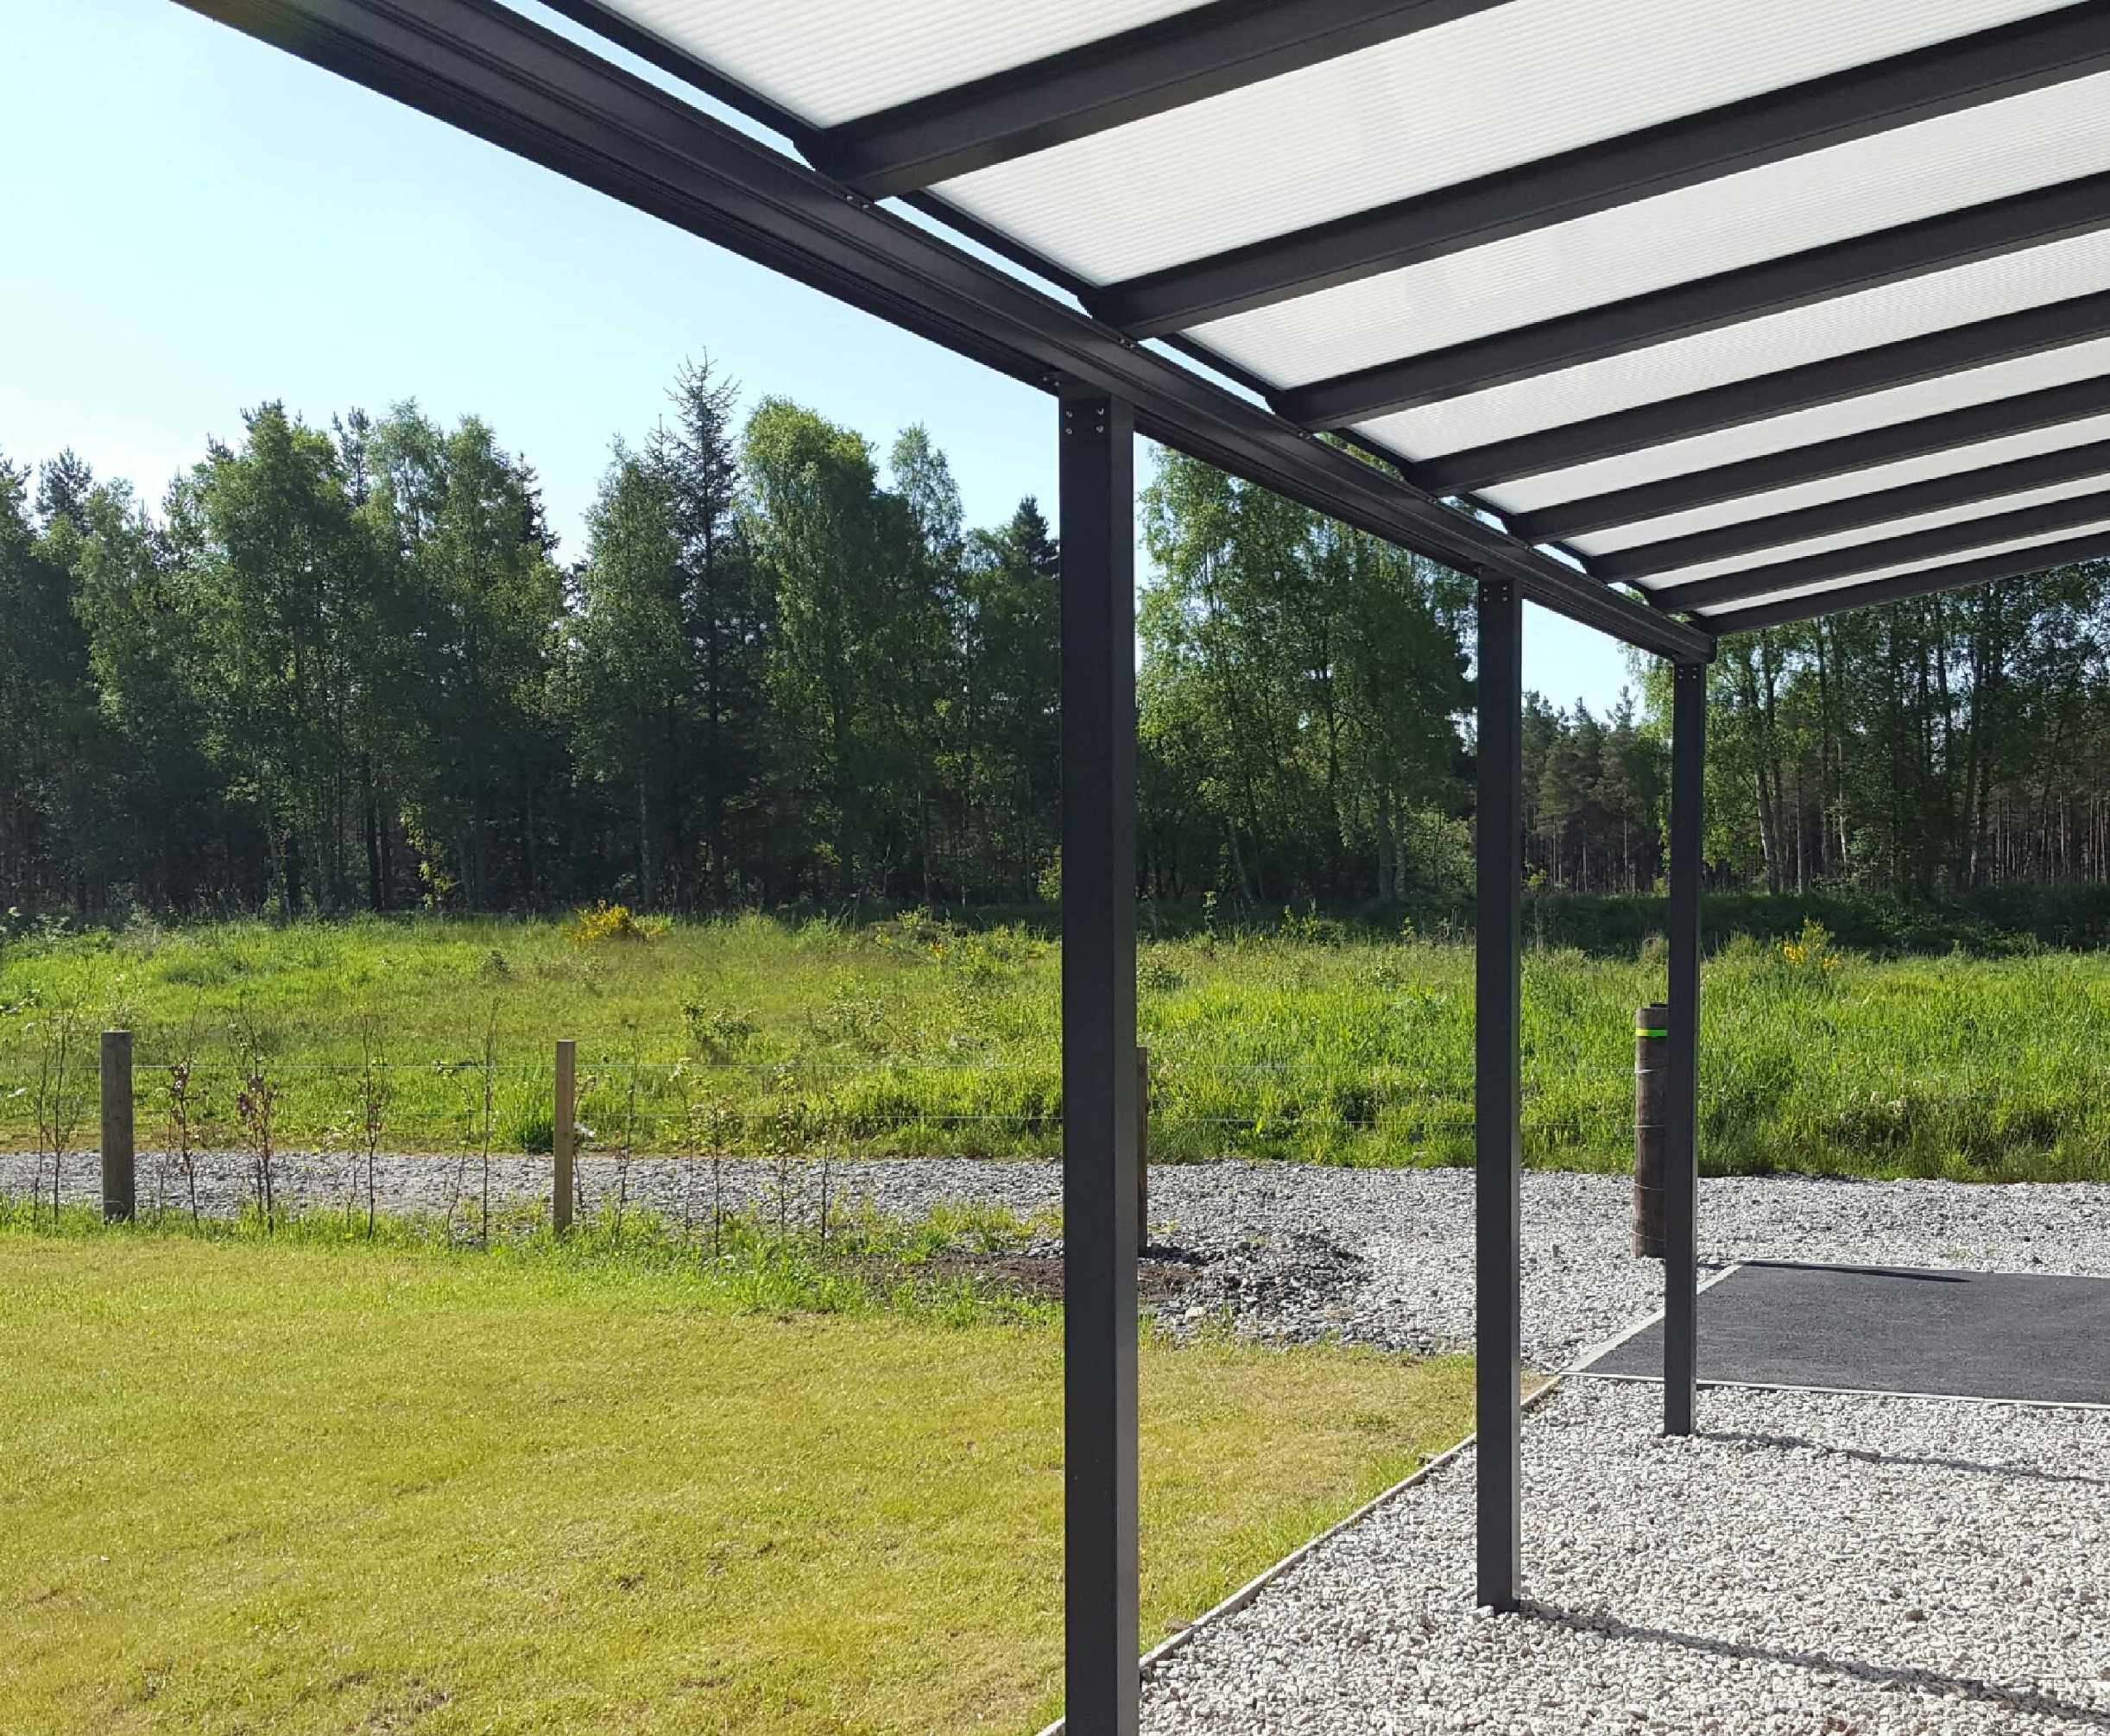 Omega Smart Lean-To Canopy, Anthracite Grey, 16mm Polycarbonate Glazing - 5.2m (W) x 4.5m (P), (3) Supporting Posts